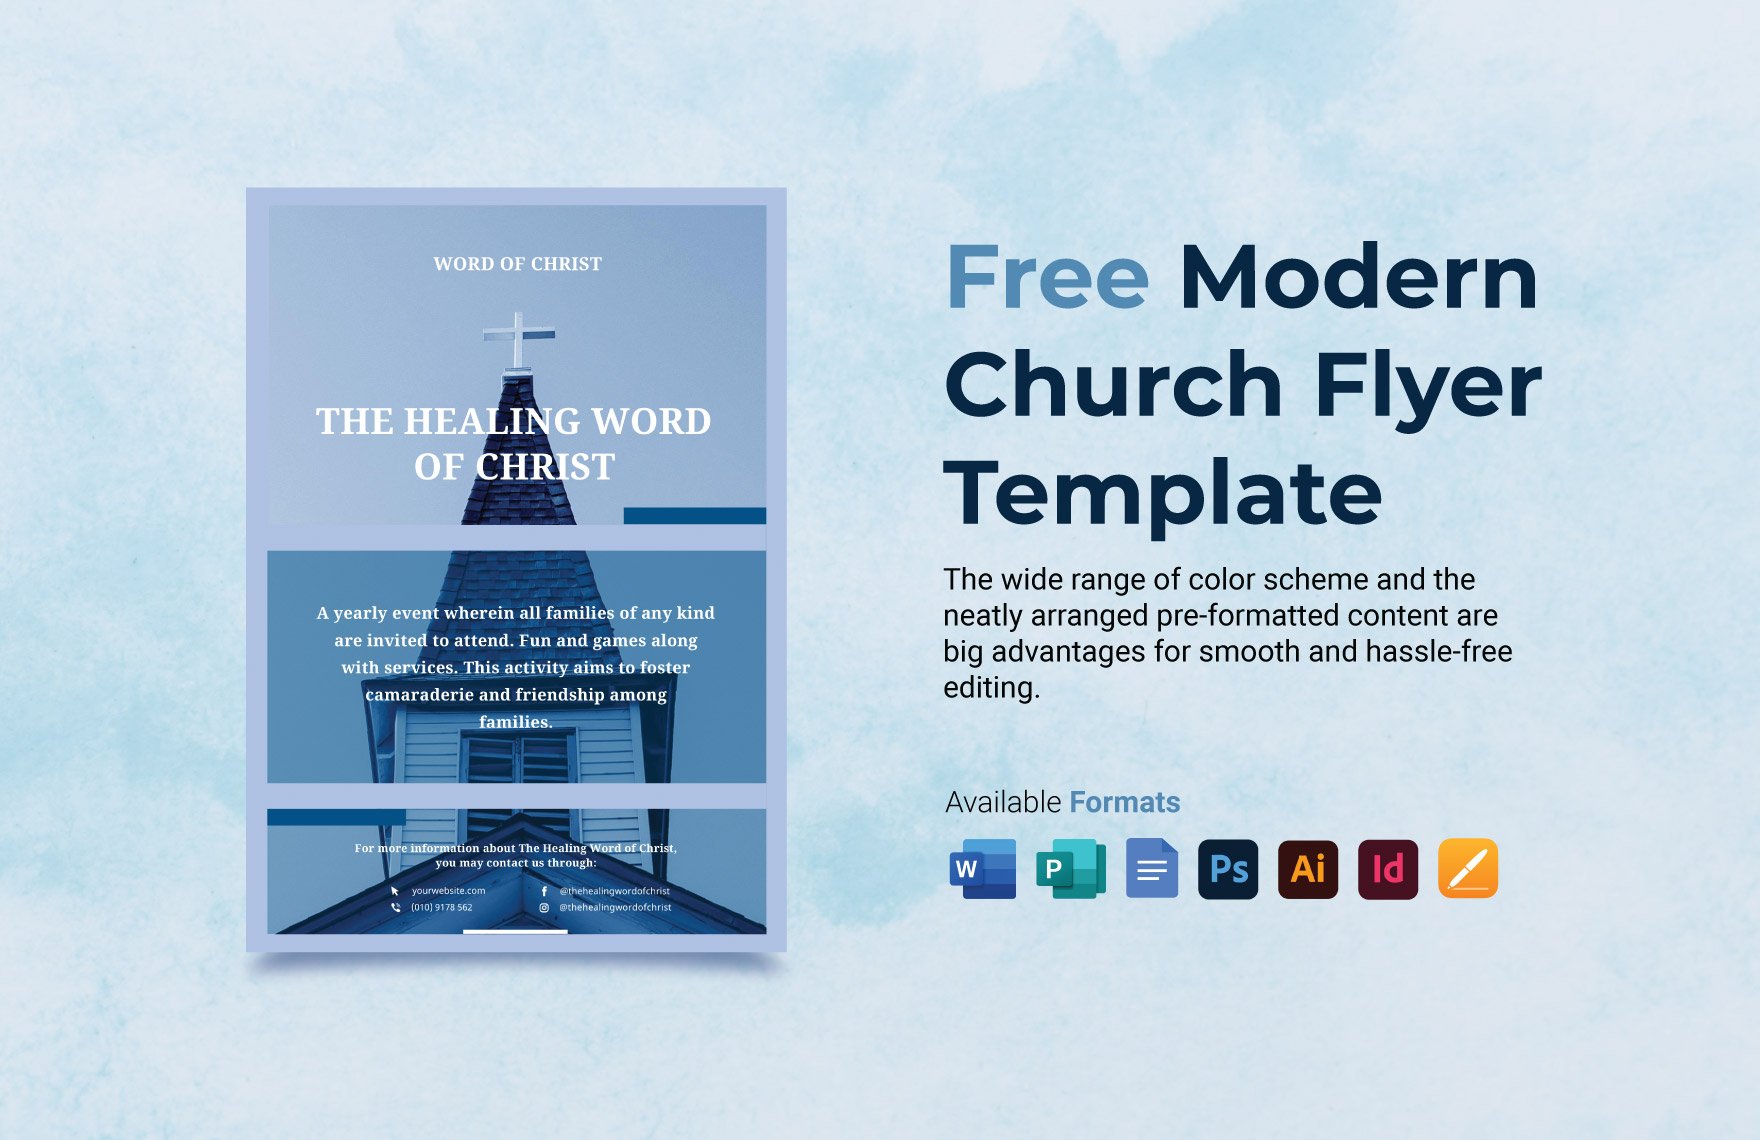 Modern Church Flyer Template in Word, Google Docs, Illustrator, PSD, Apple Pages, Publisher, InDesign